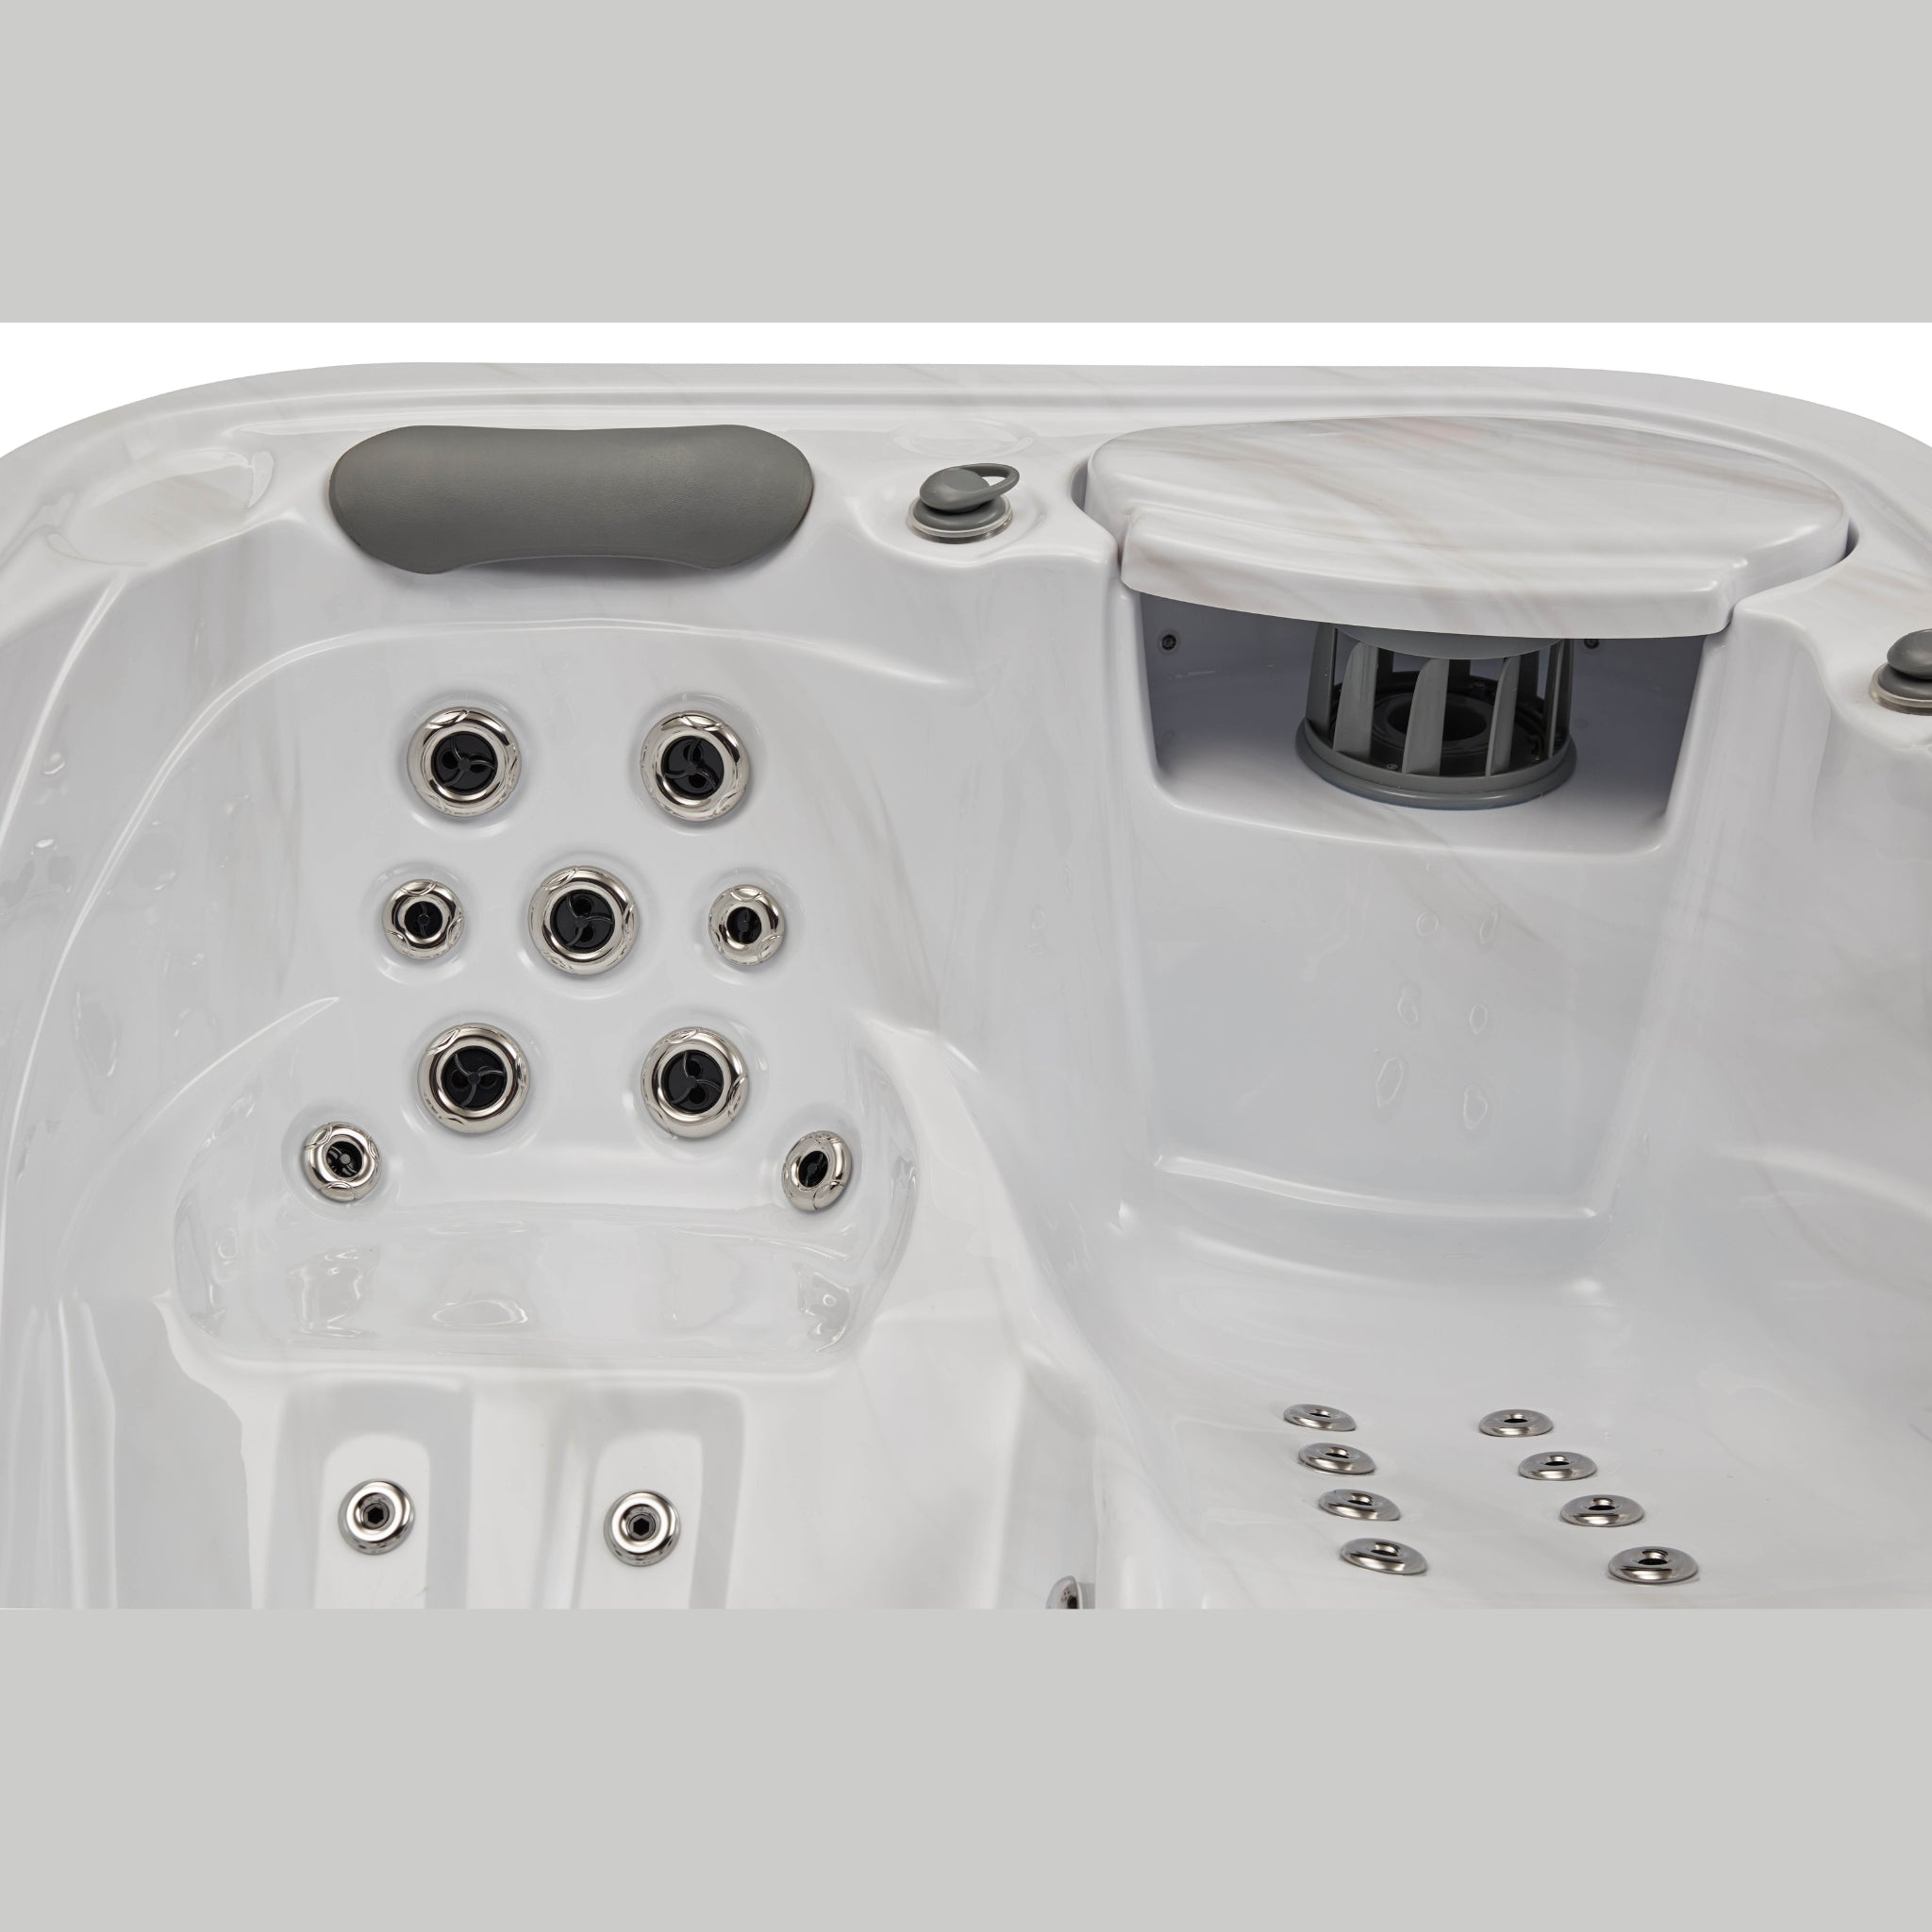 Casey 3-Person 47 Jet Lounger Hot Tub with Bluetooth